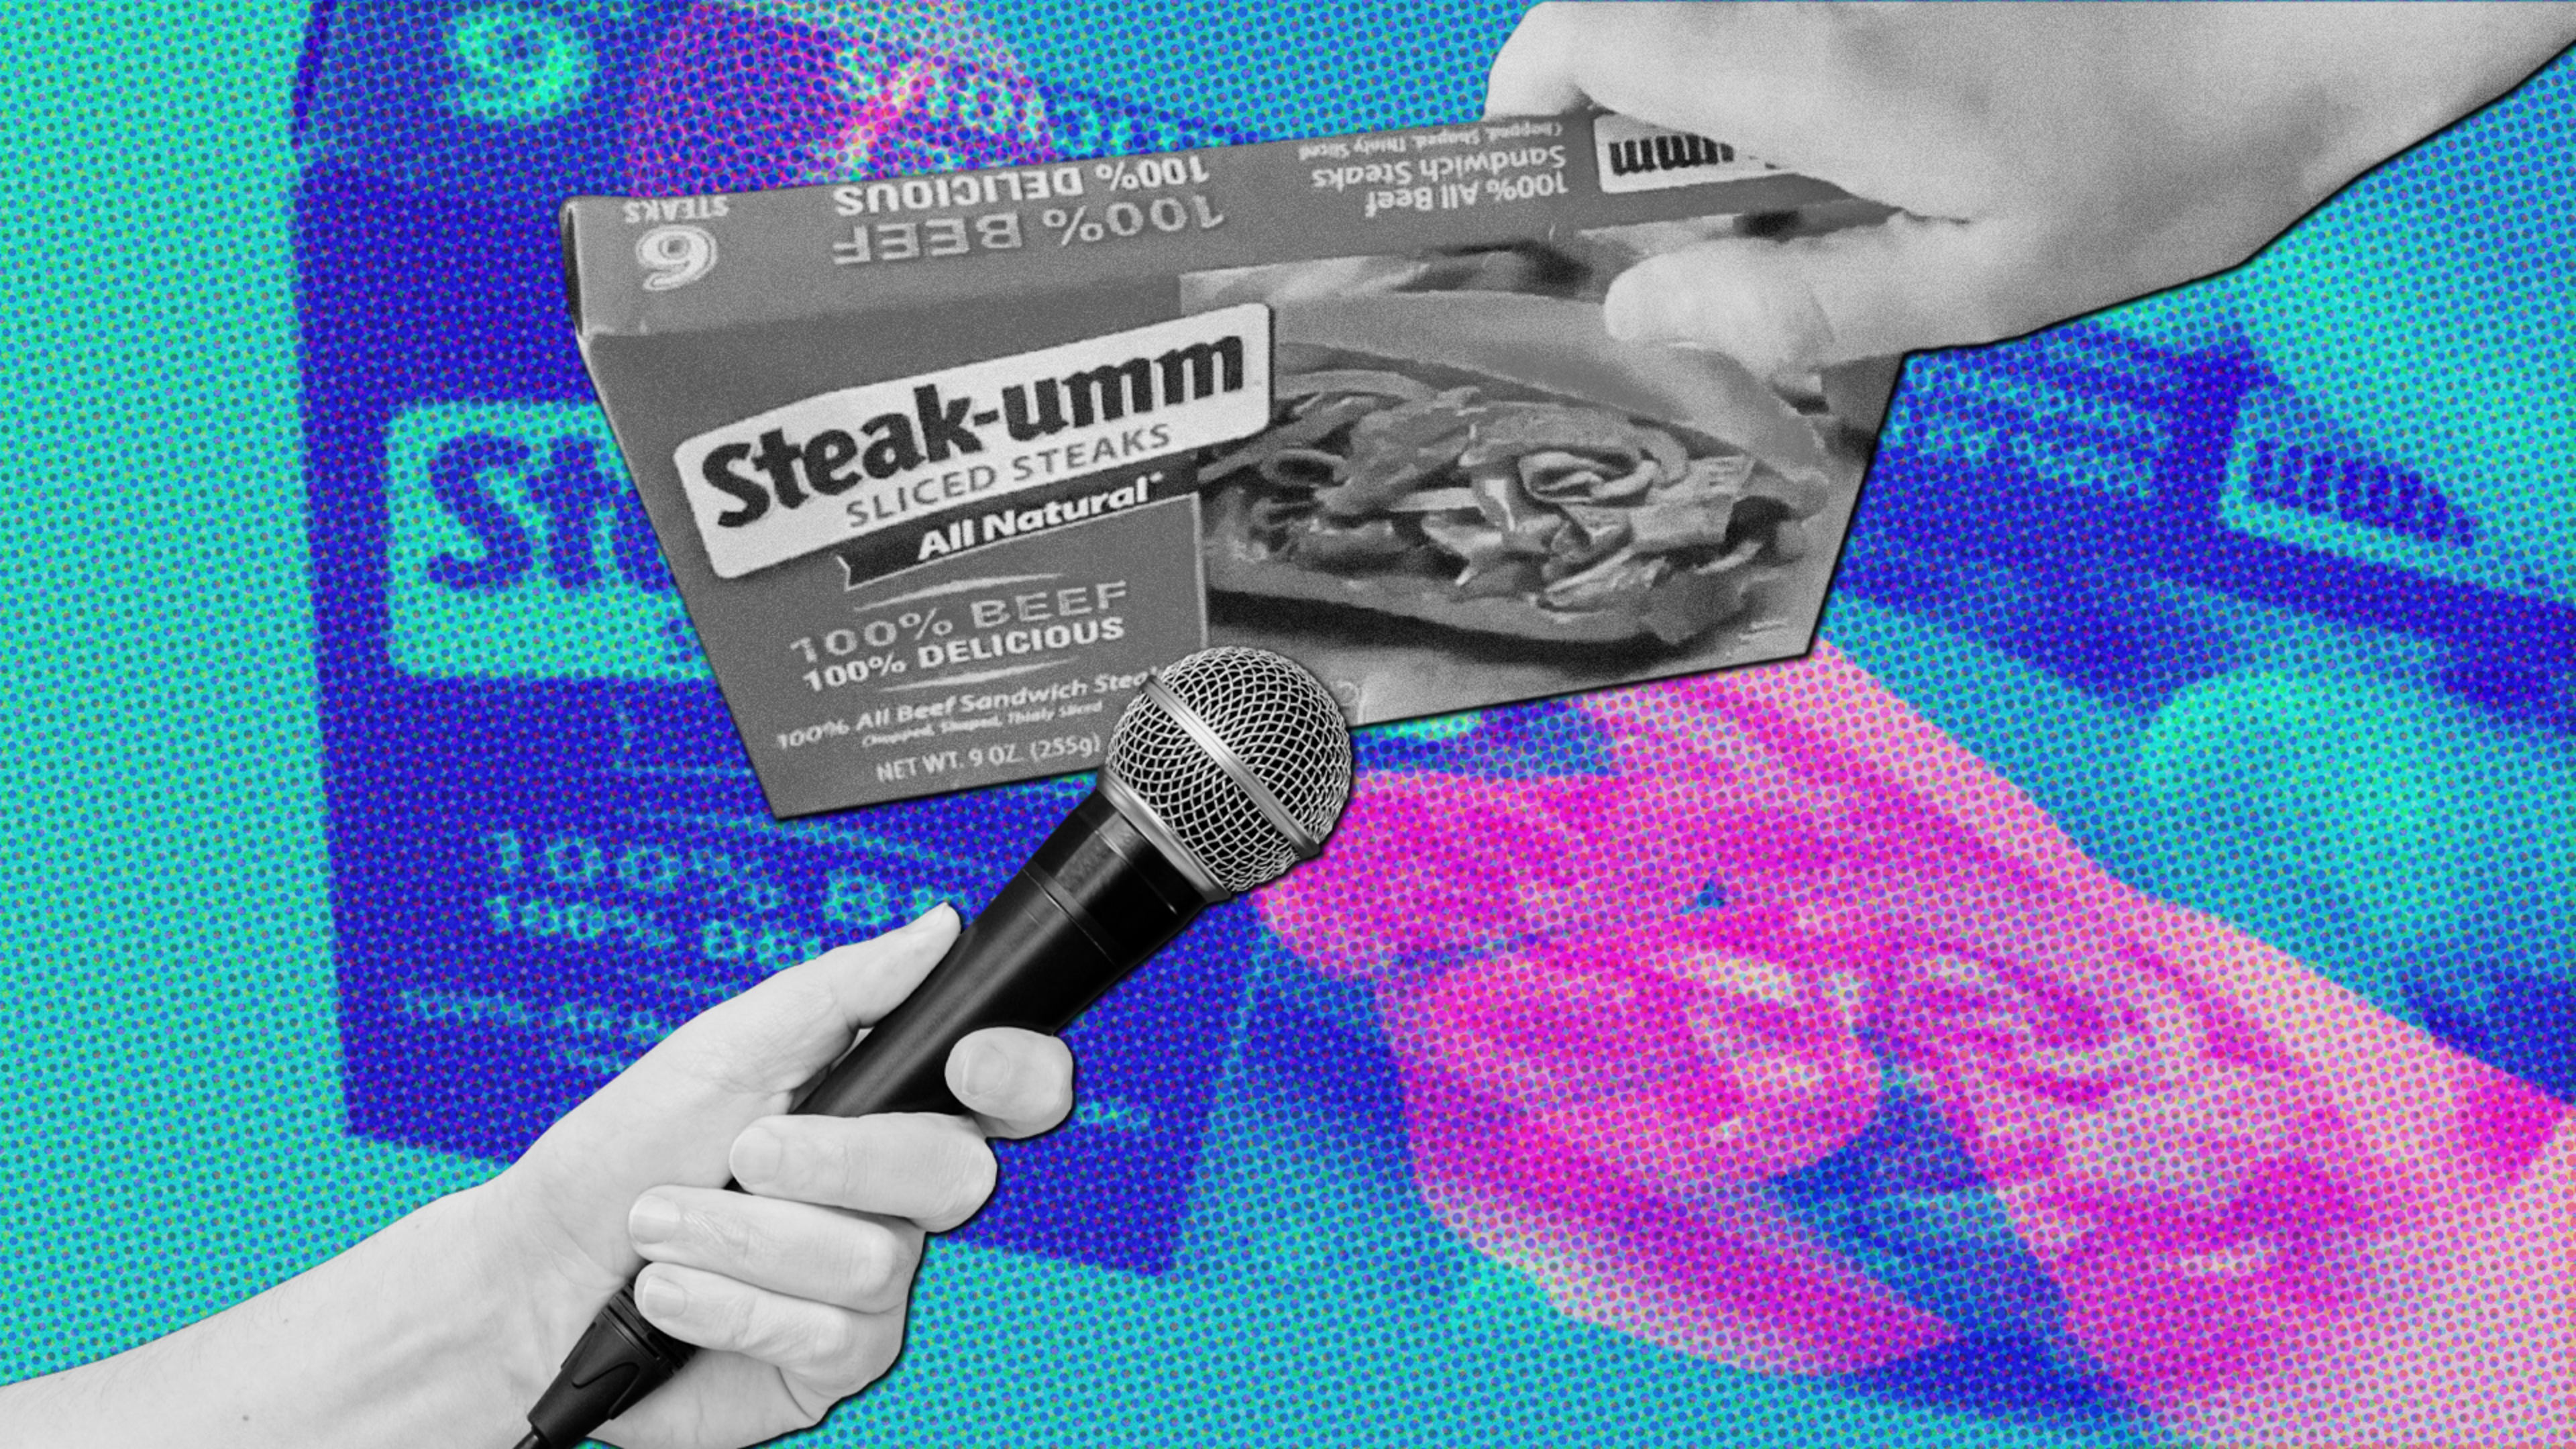 How Steak-Umm—yes, that Steak-Umm—became a voice of reason in the pandemic